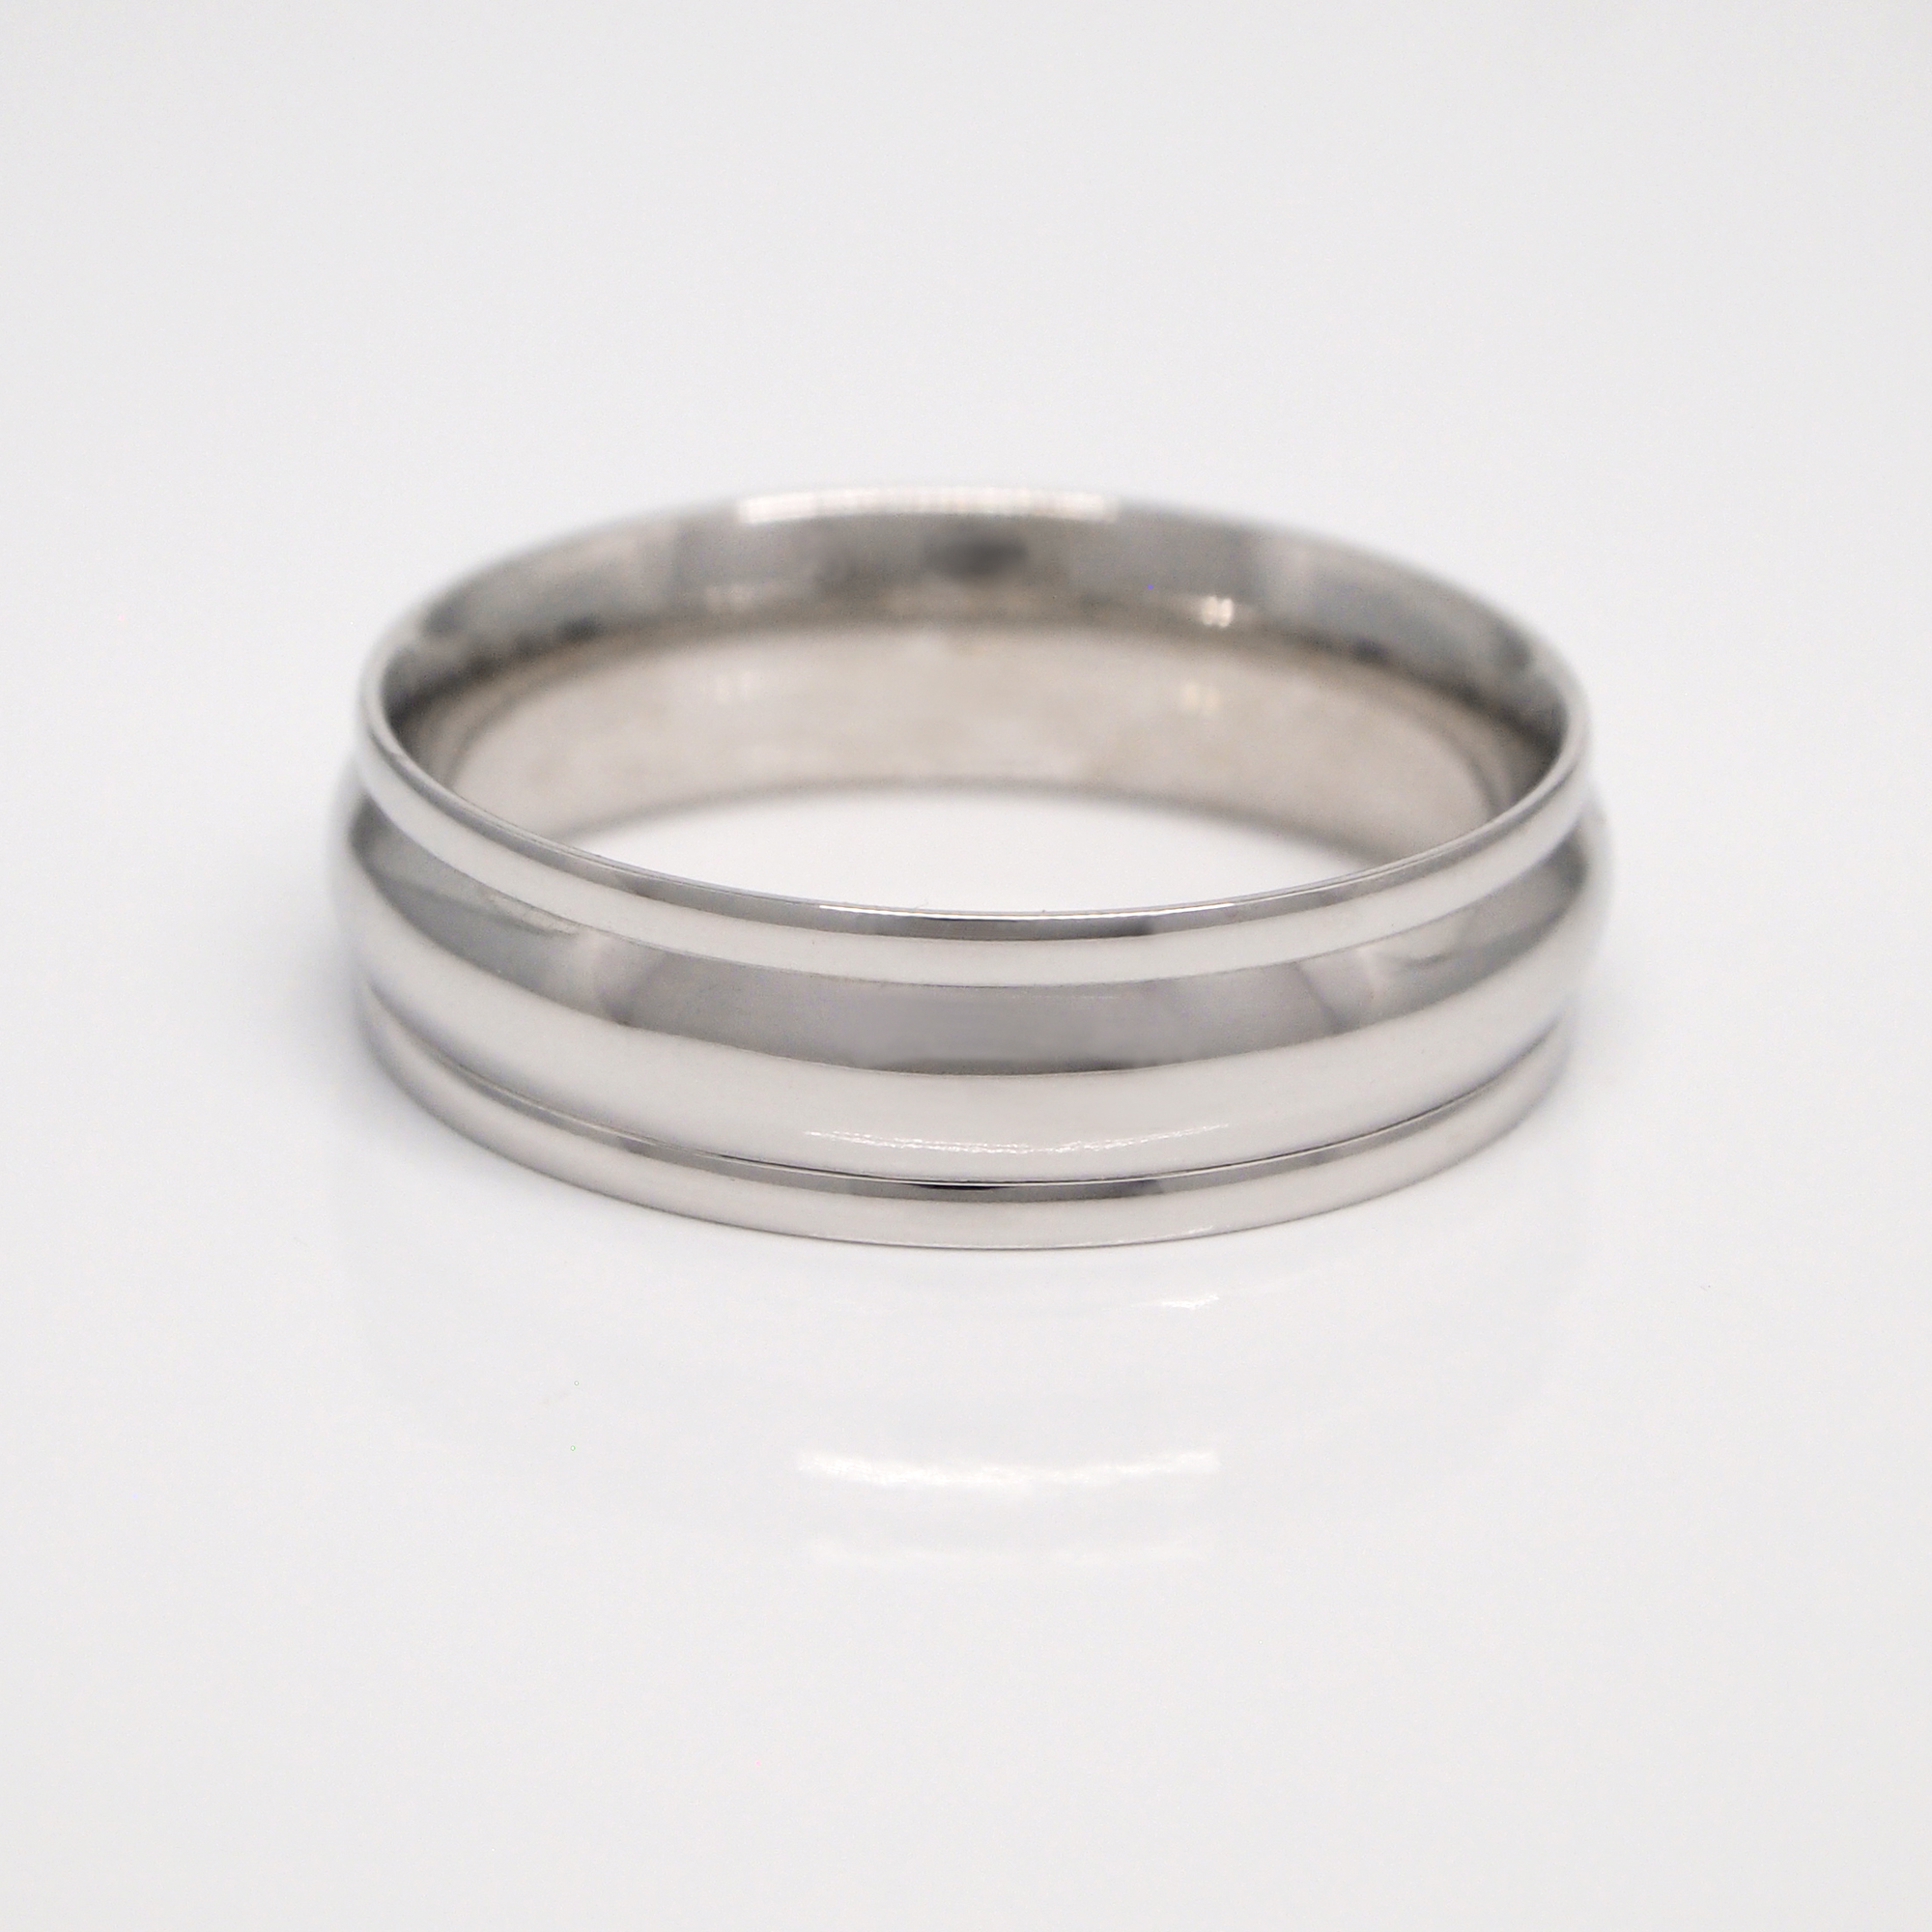 14K white gold 6mm men's wedding band featuring 3 sections and a high polish finish.